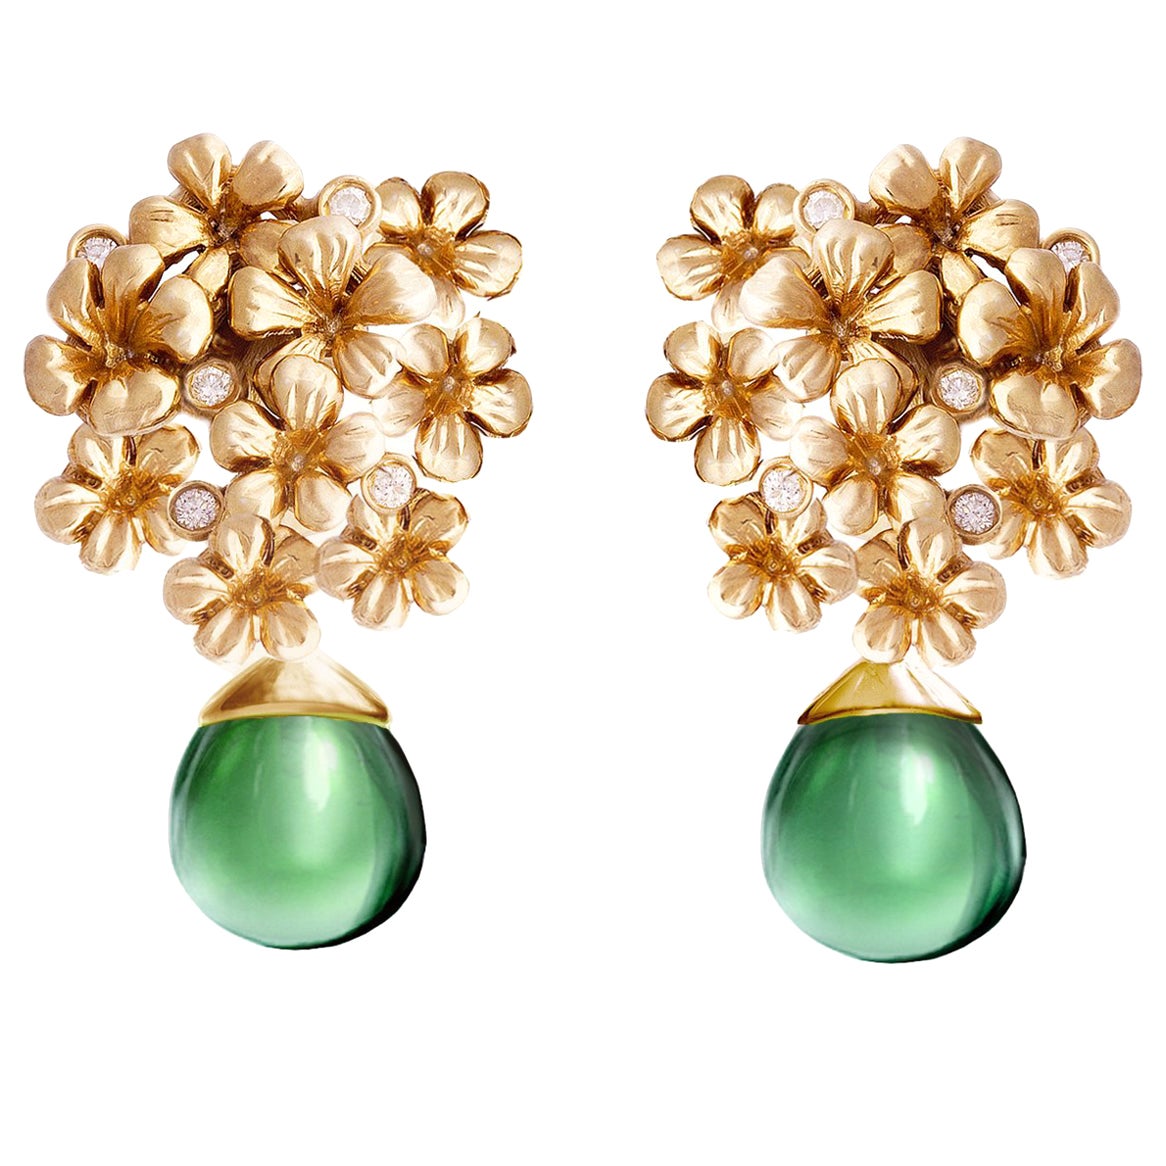 Eighteen Karat Yellow Gold Blossom Contemporary Earrings with Natural Diamonds